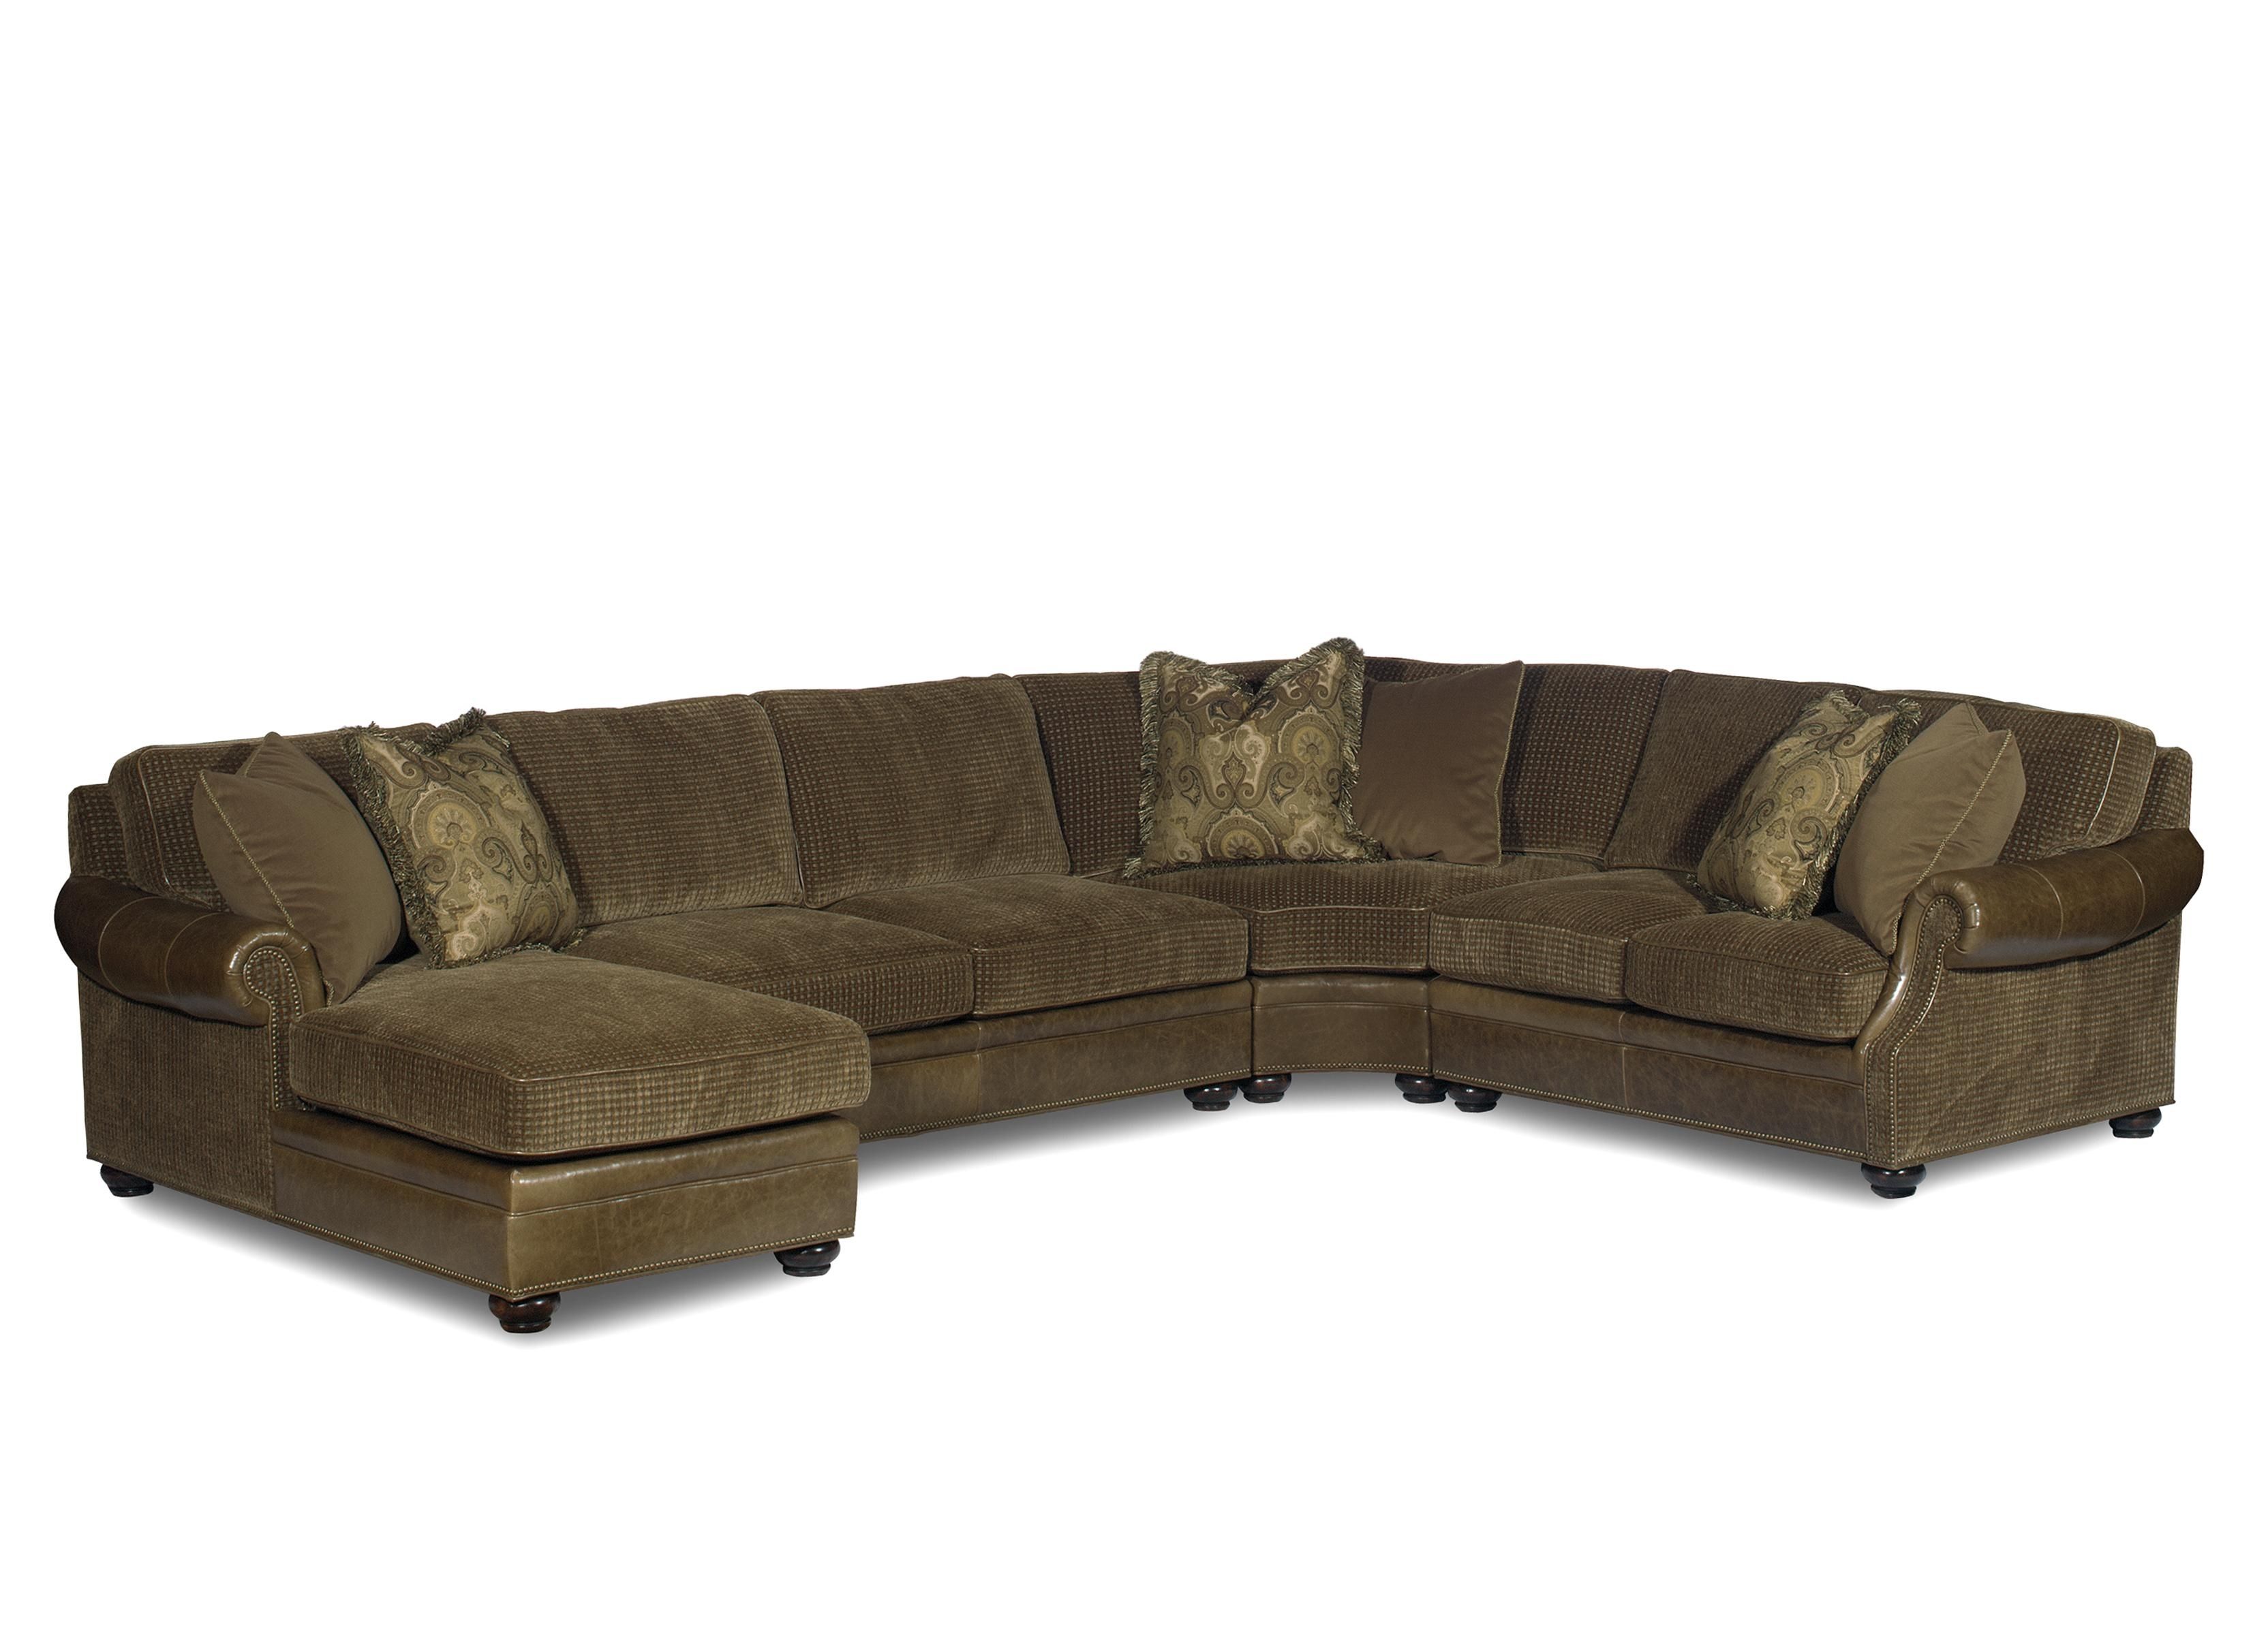 Bradington Young Warner Sectional Sofa With Chaise Lounger – Ahfa In Visalia Ca Sectional Sofas (View 6 of 10)